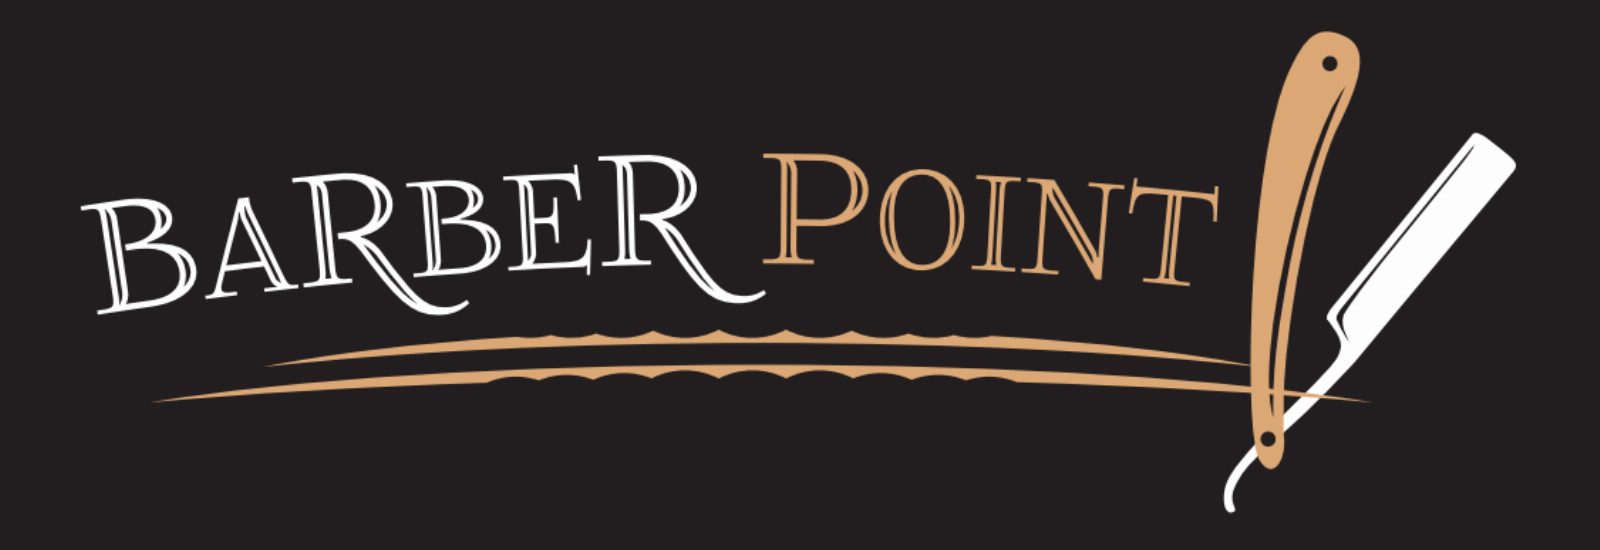 Barber Point